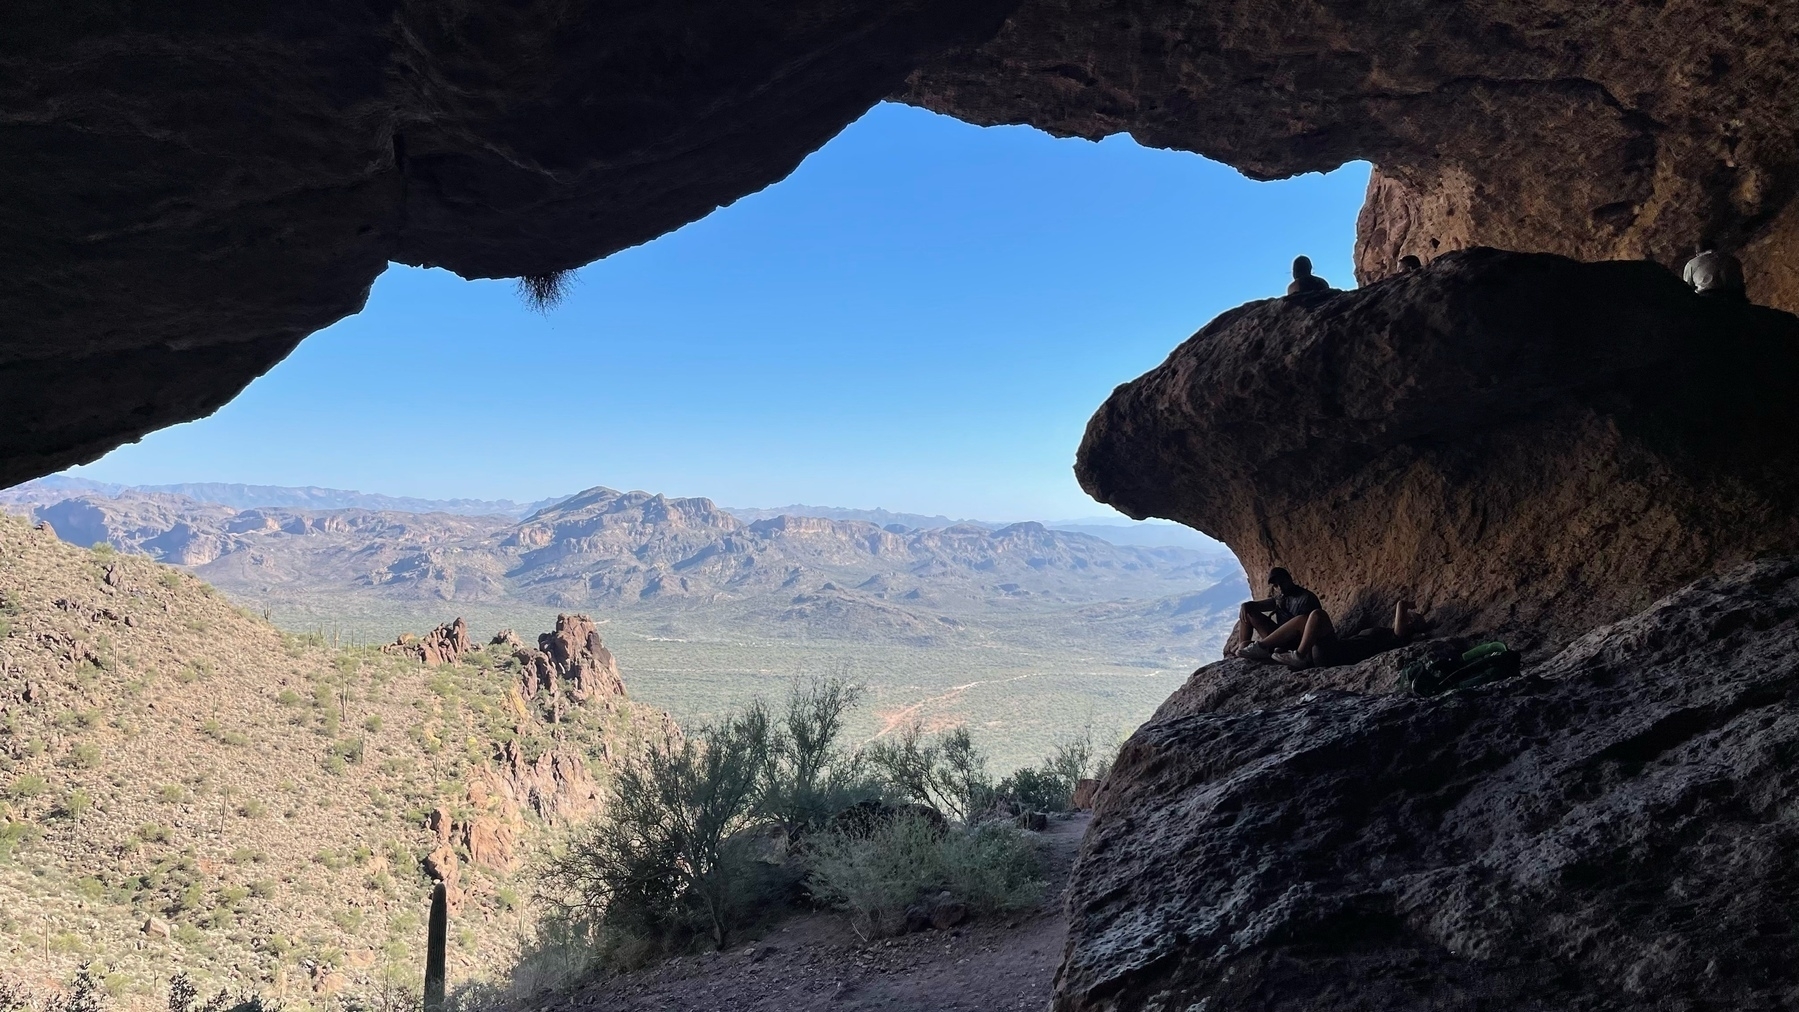 Looking out Wave Cave, Superstition Mountains, AZ